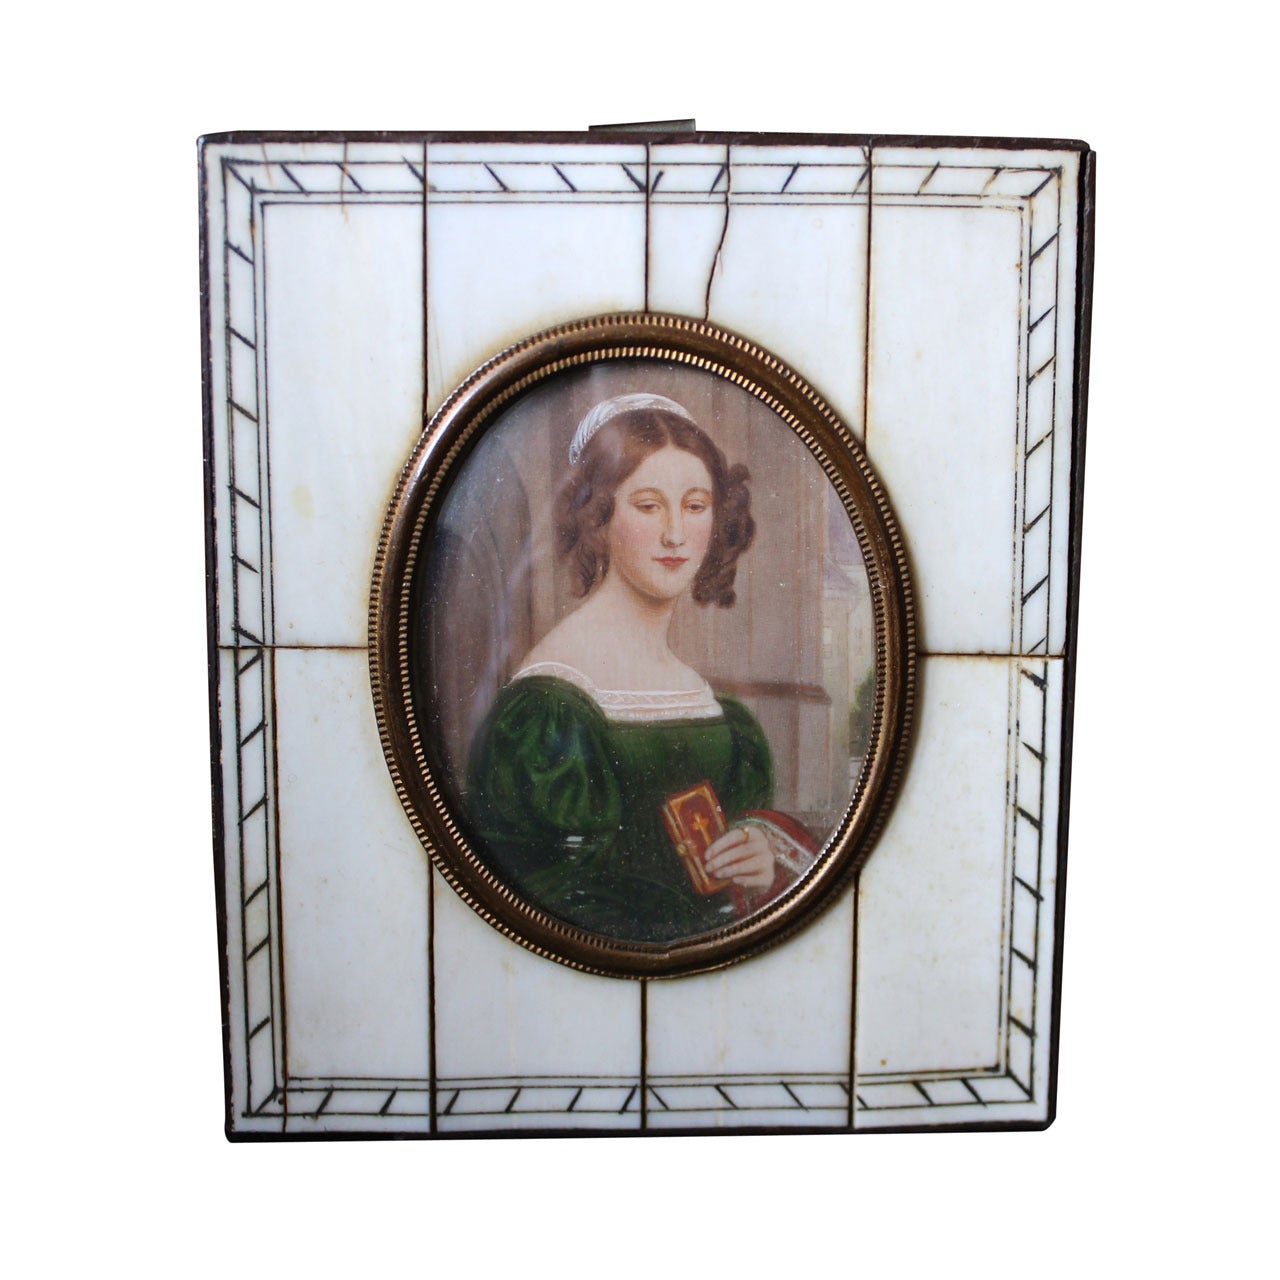 A Miniature Portrait of a Young Woman